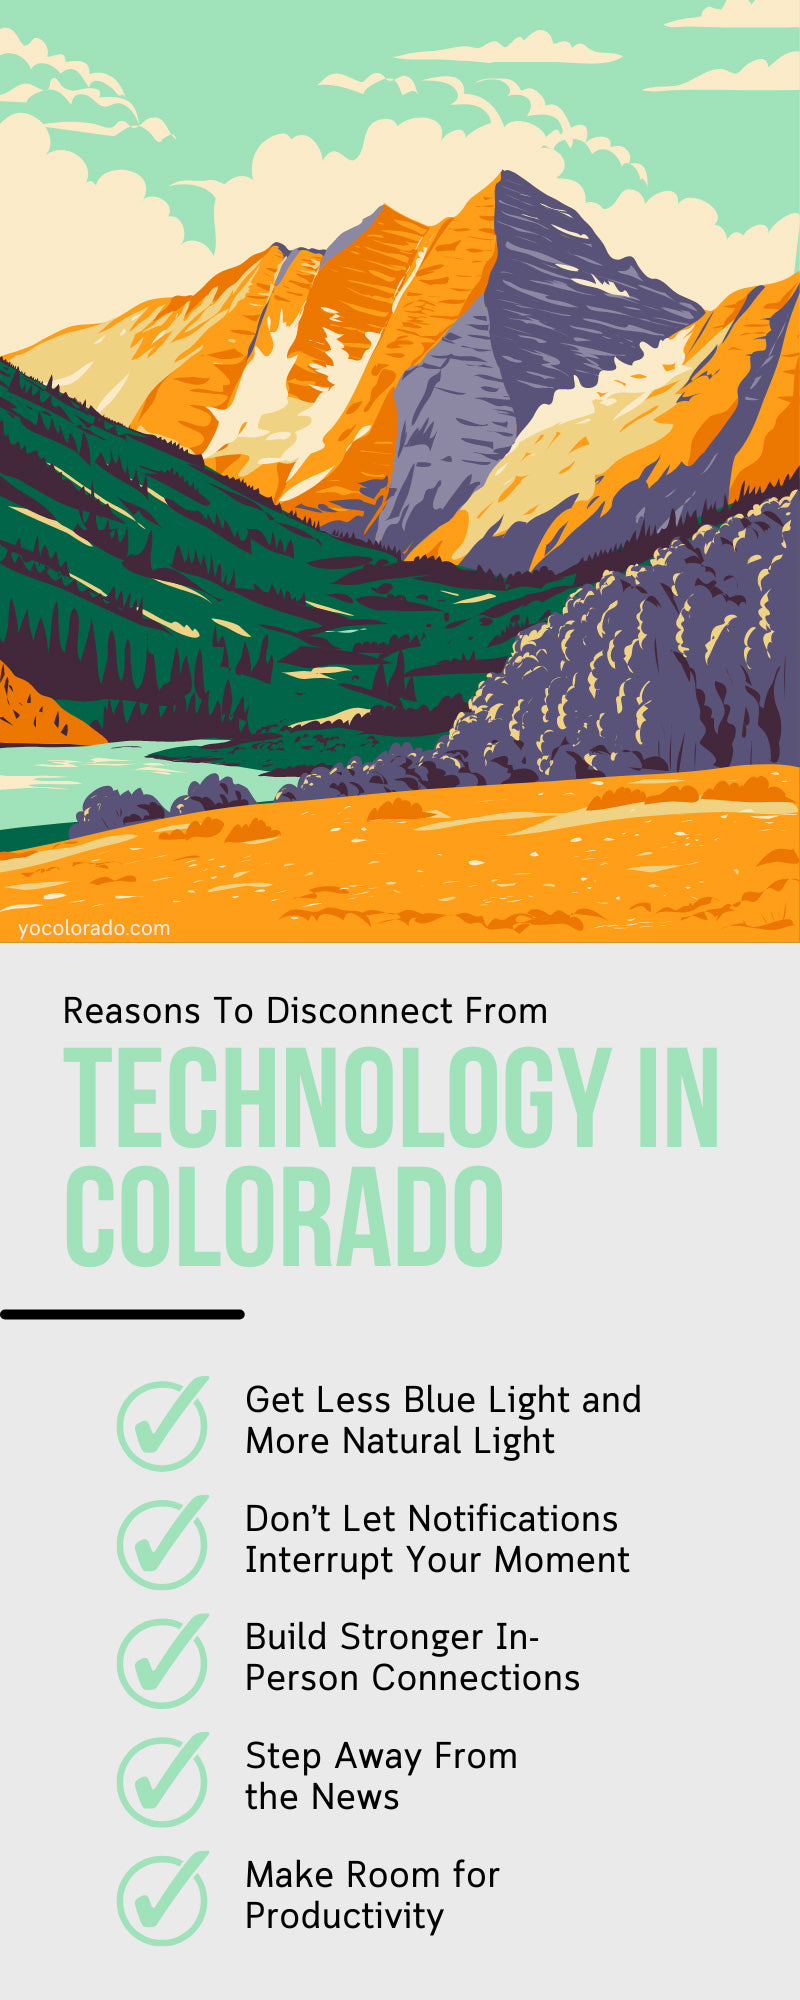 Reasons To Disconnect From Technology in Colorado